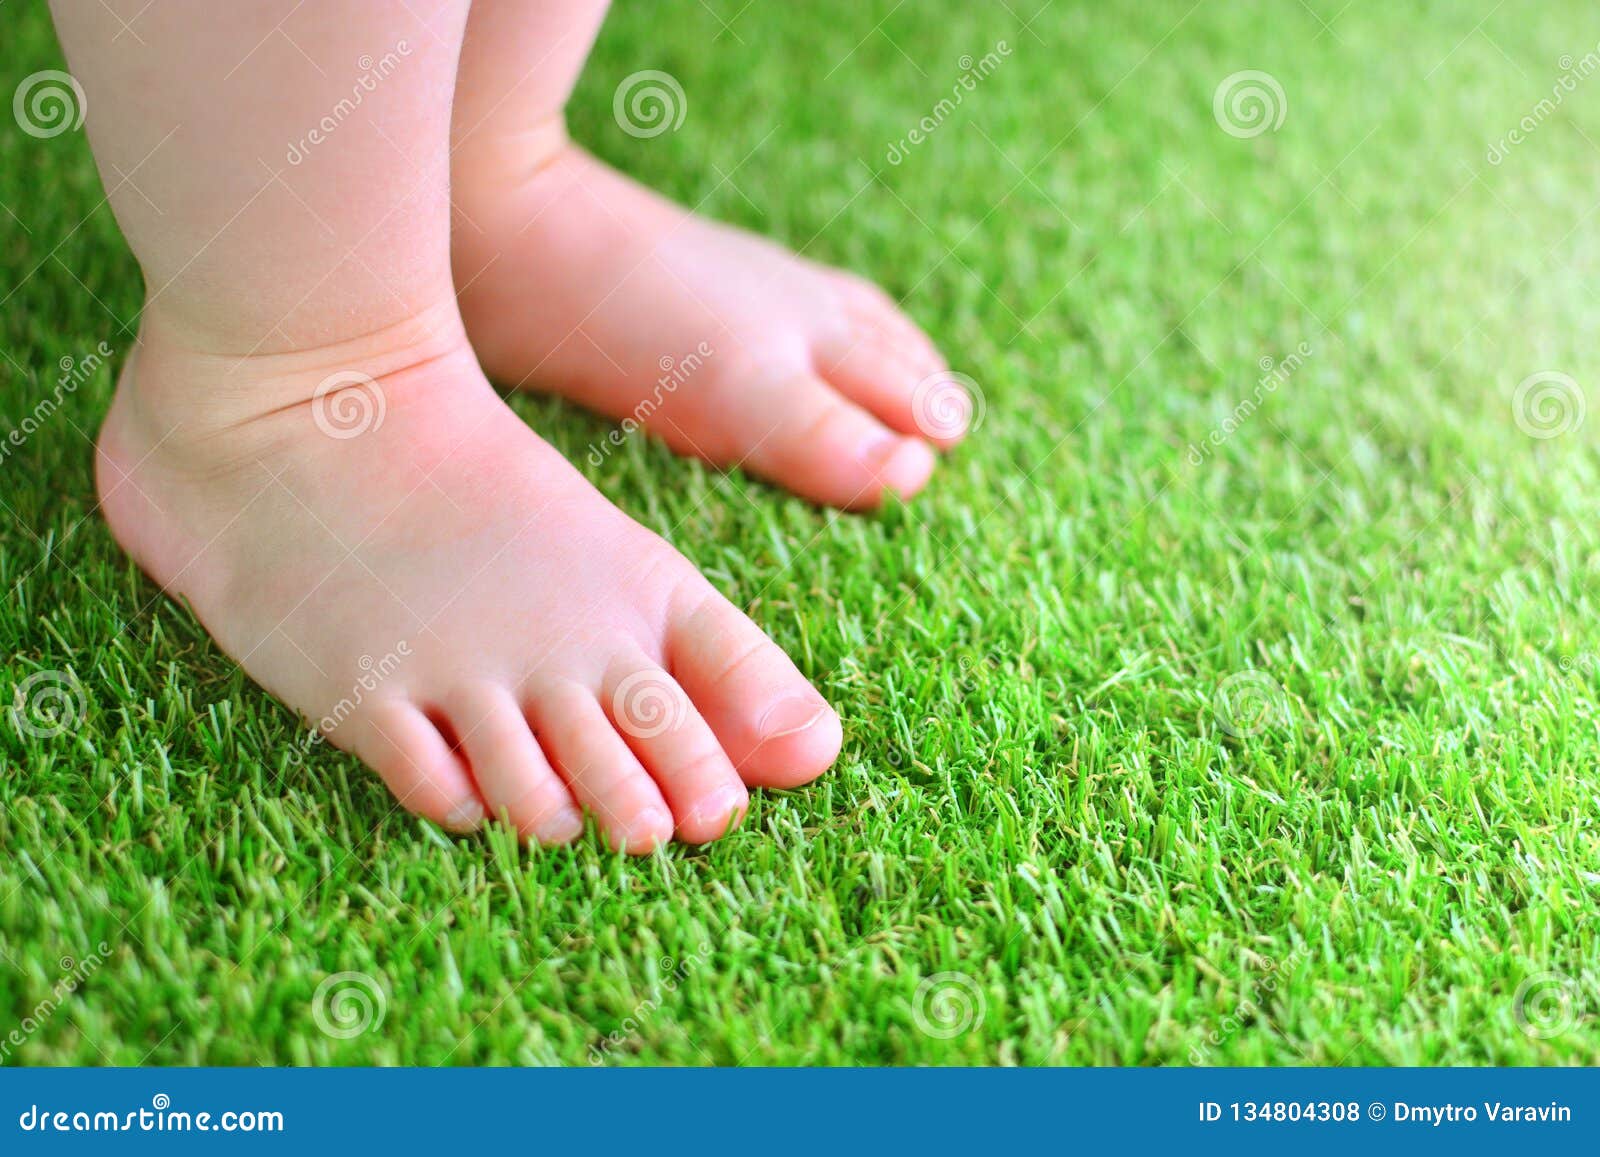 artificial grass background. tender foots of a baby on a green artificial turf.